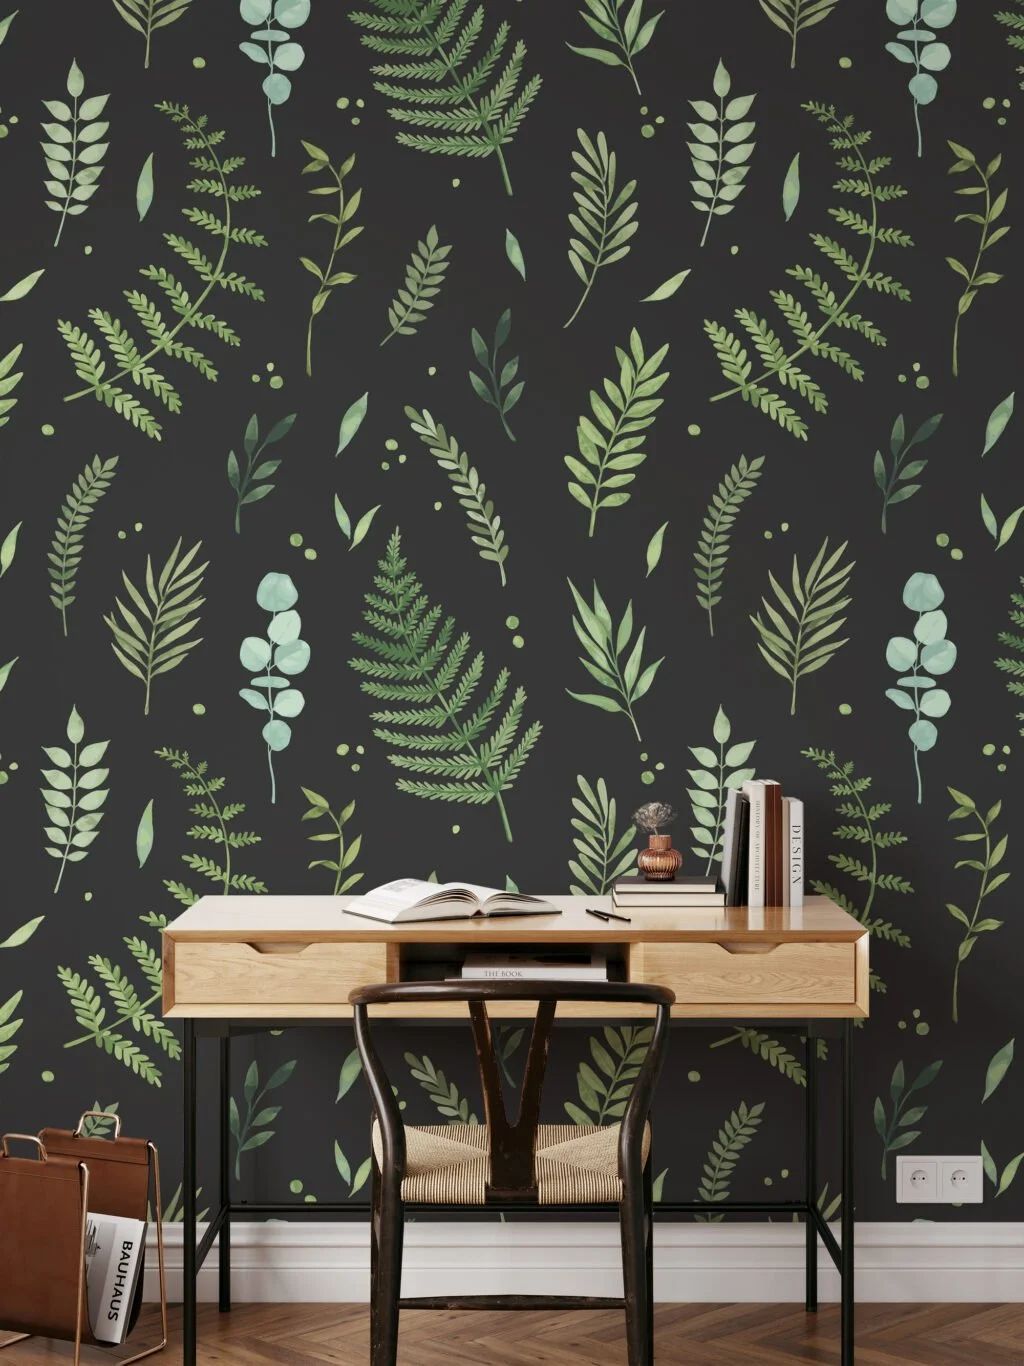 Green Leaves And Branches With A Dark Background Wallpaper, Nighttime Botanicals Peel & Stick Wall Mural